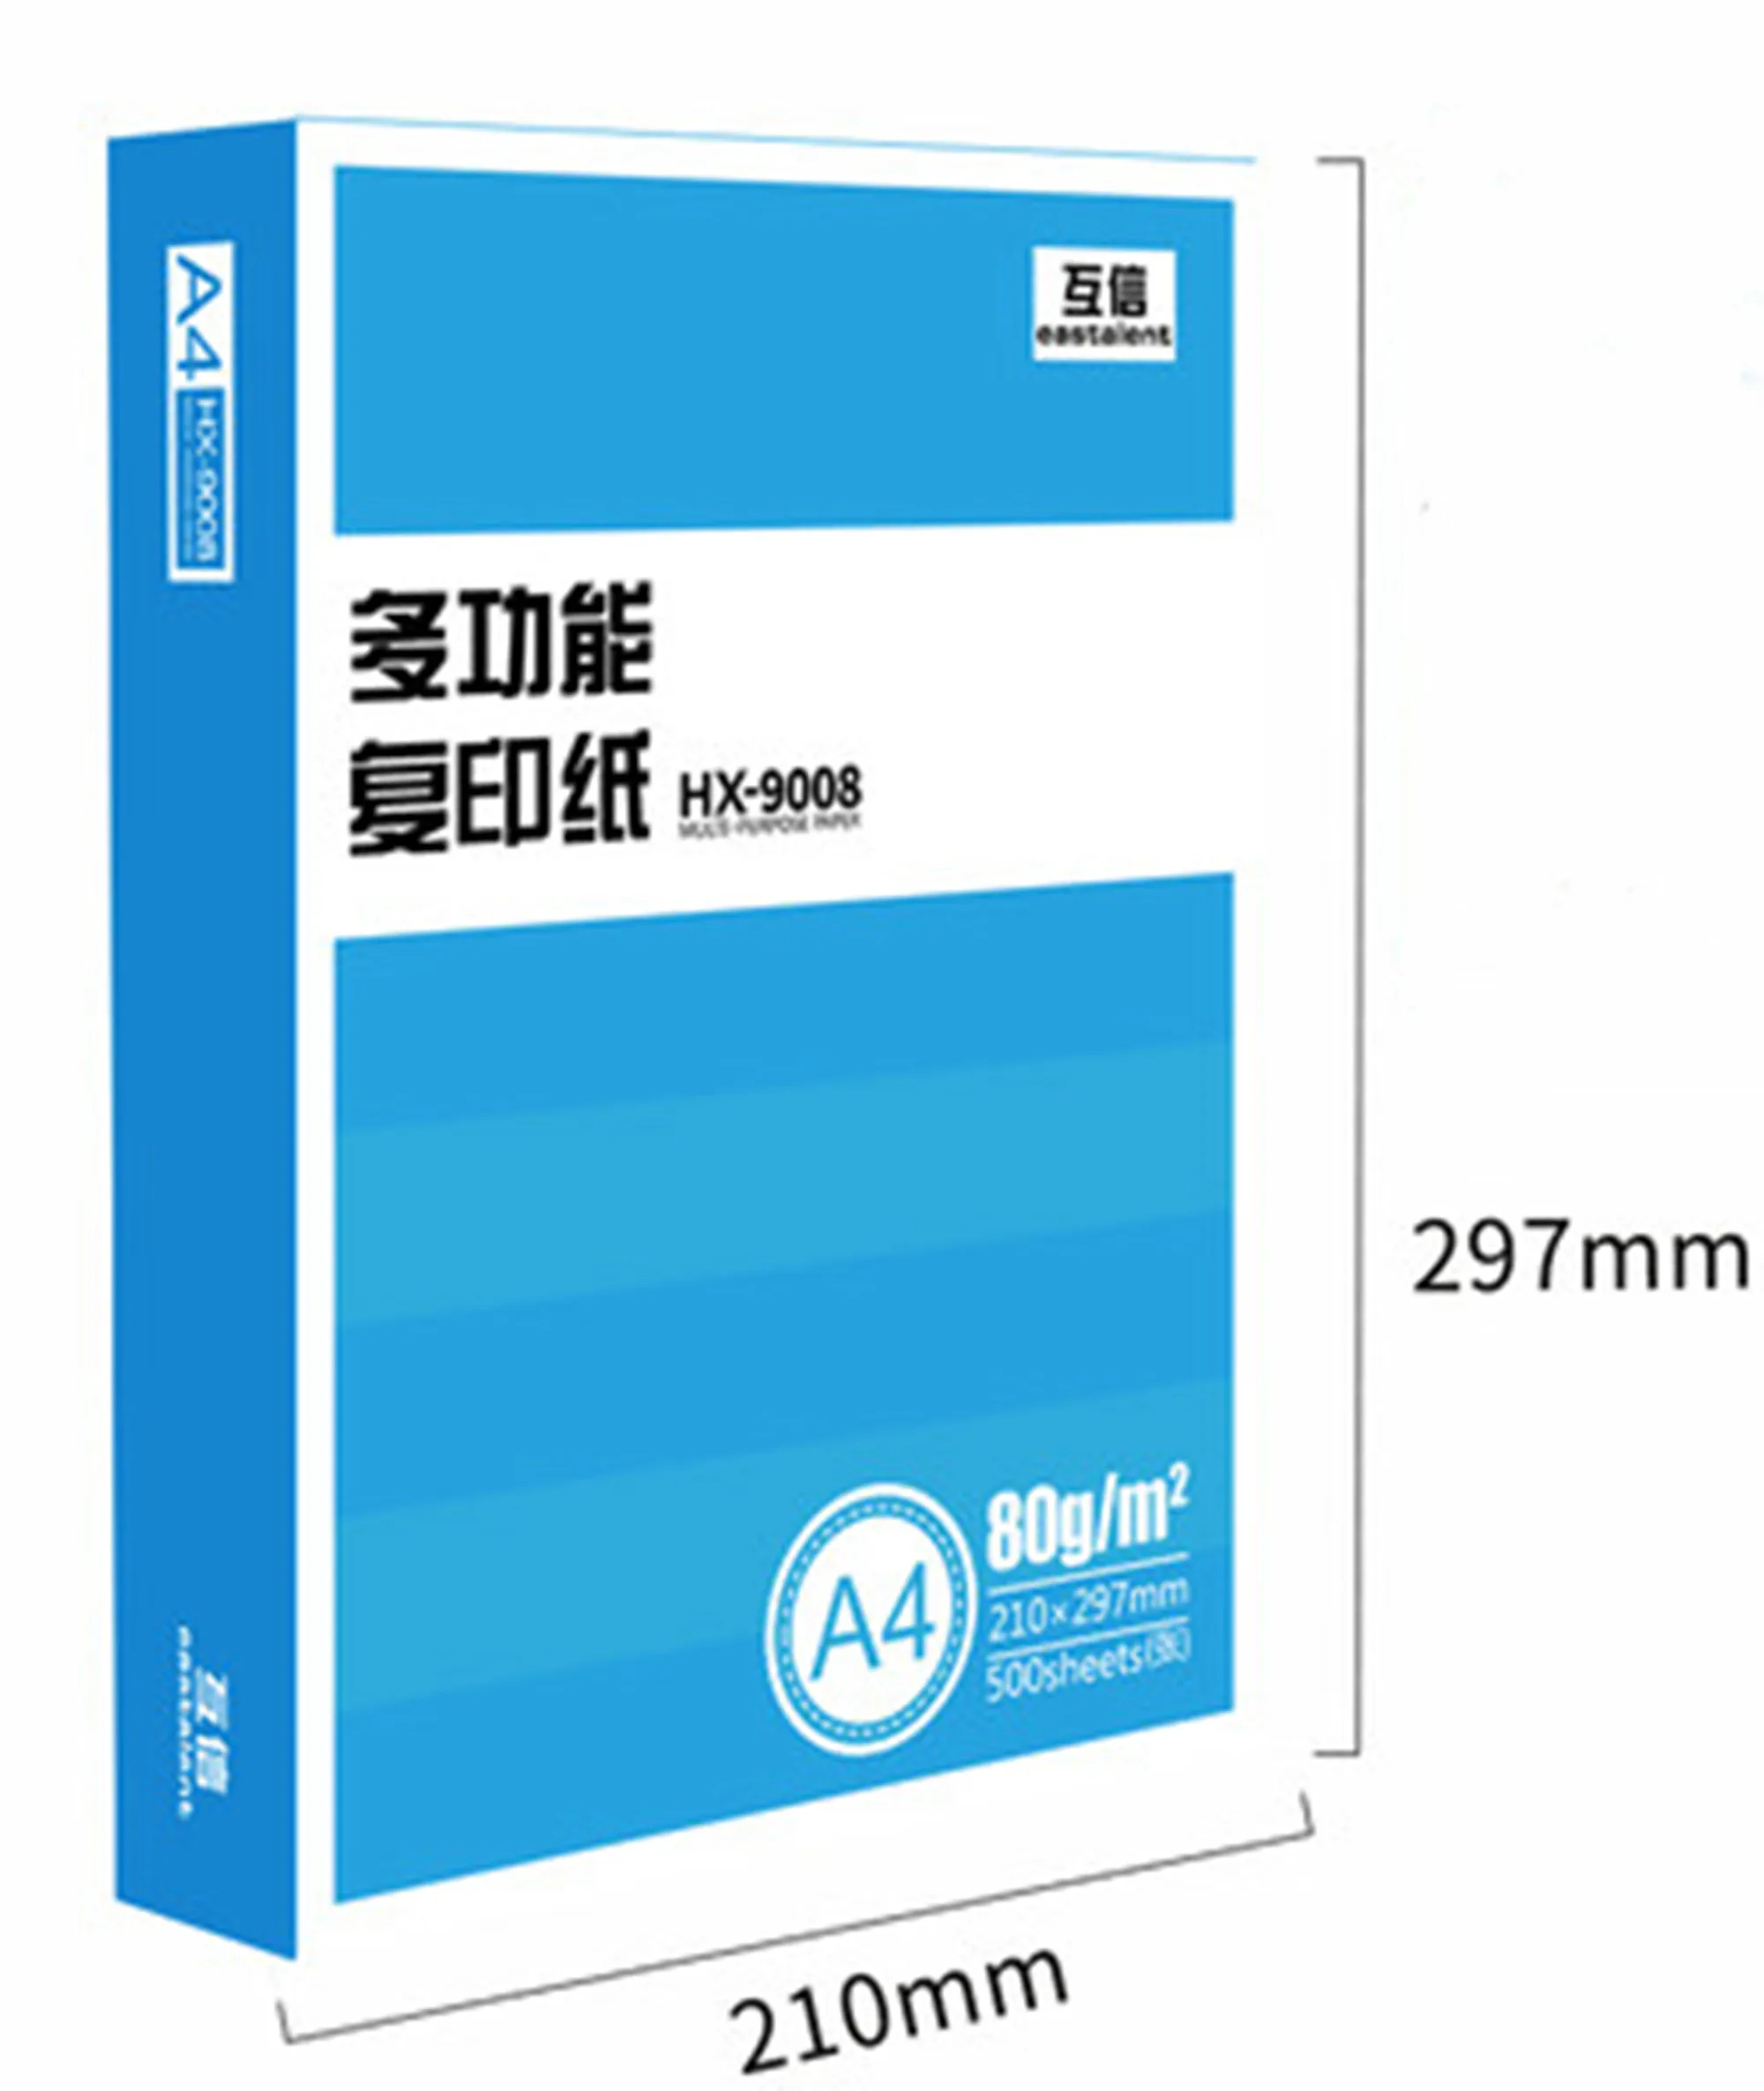 
Professional Office 80gsm Mutual Trust A4 Size Copier Paper  (1600084515114)